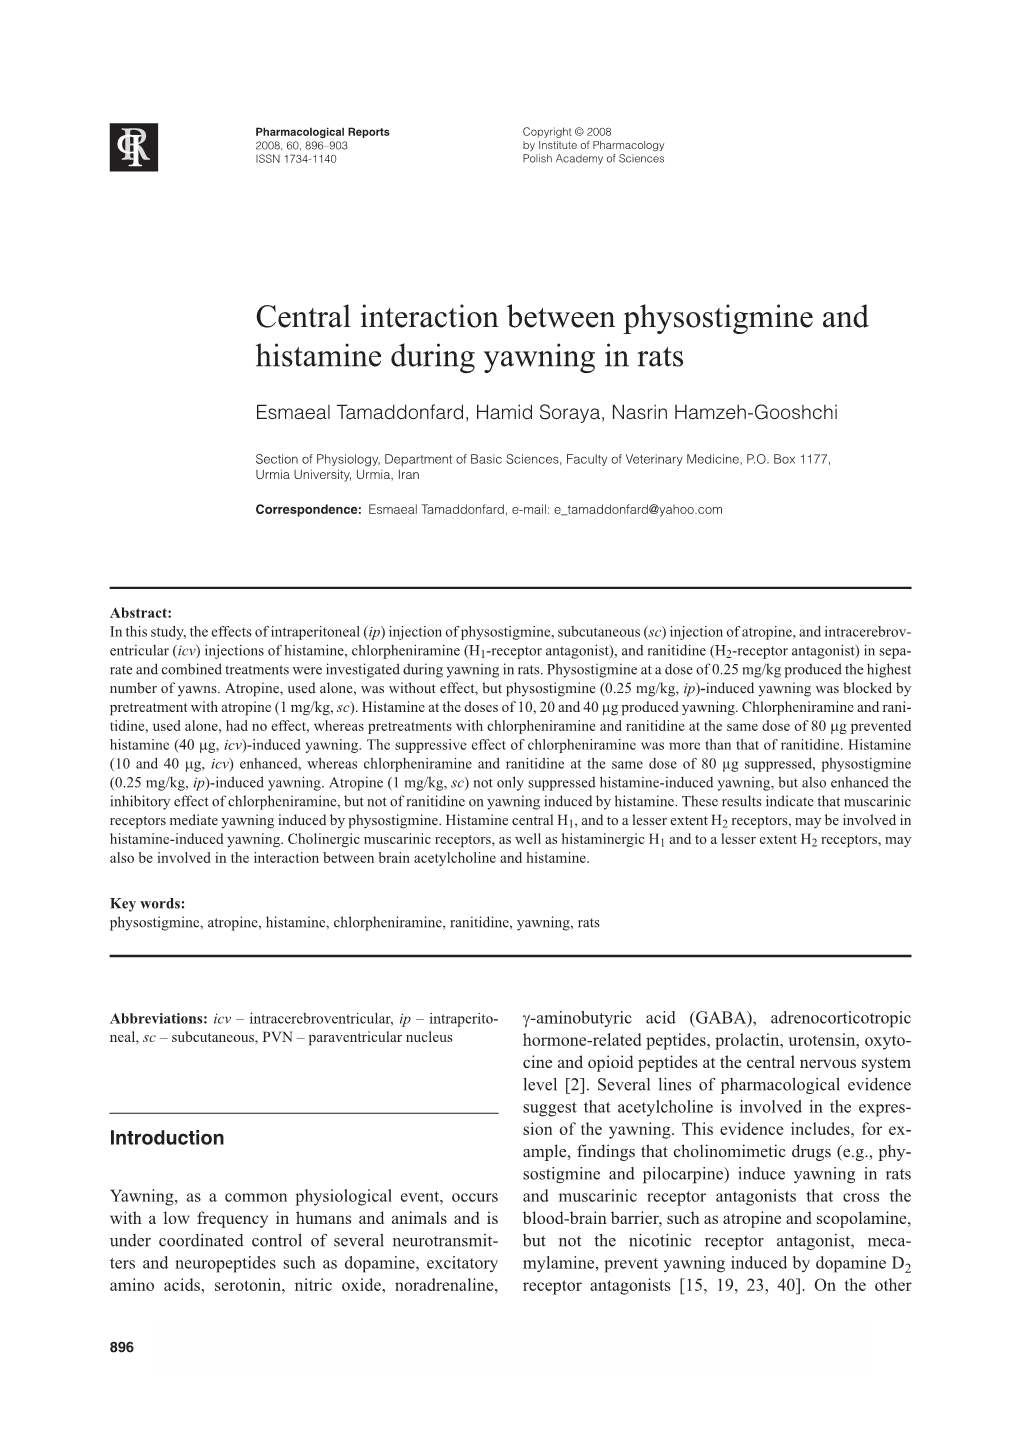 Central Interaction Between Physostigmine and Histamine During Yawning in Rats